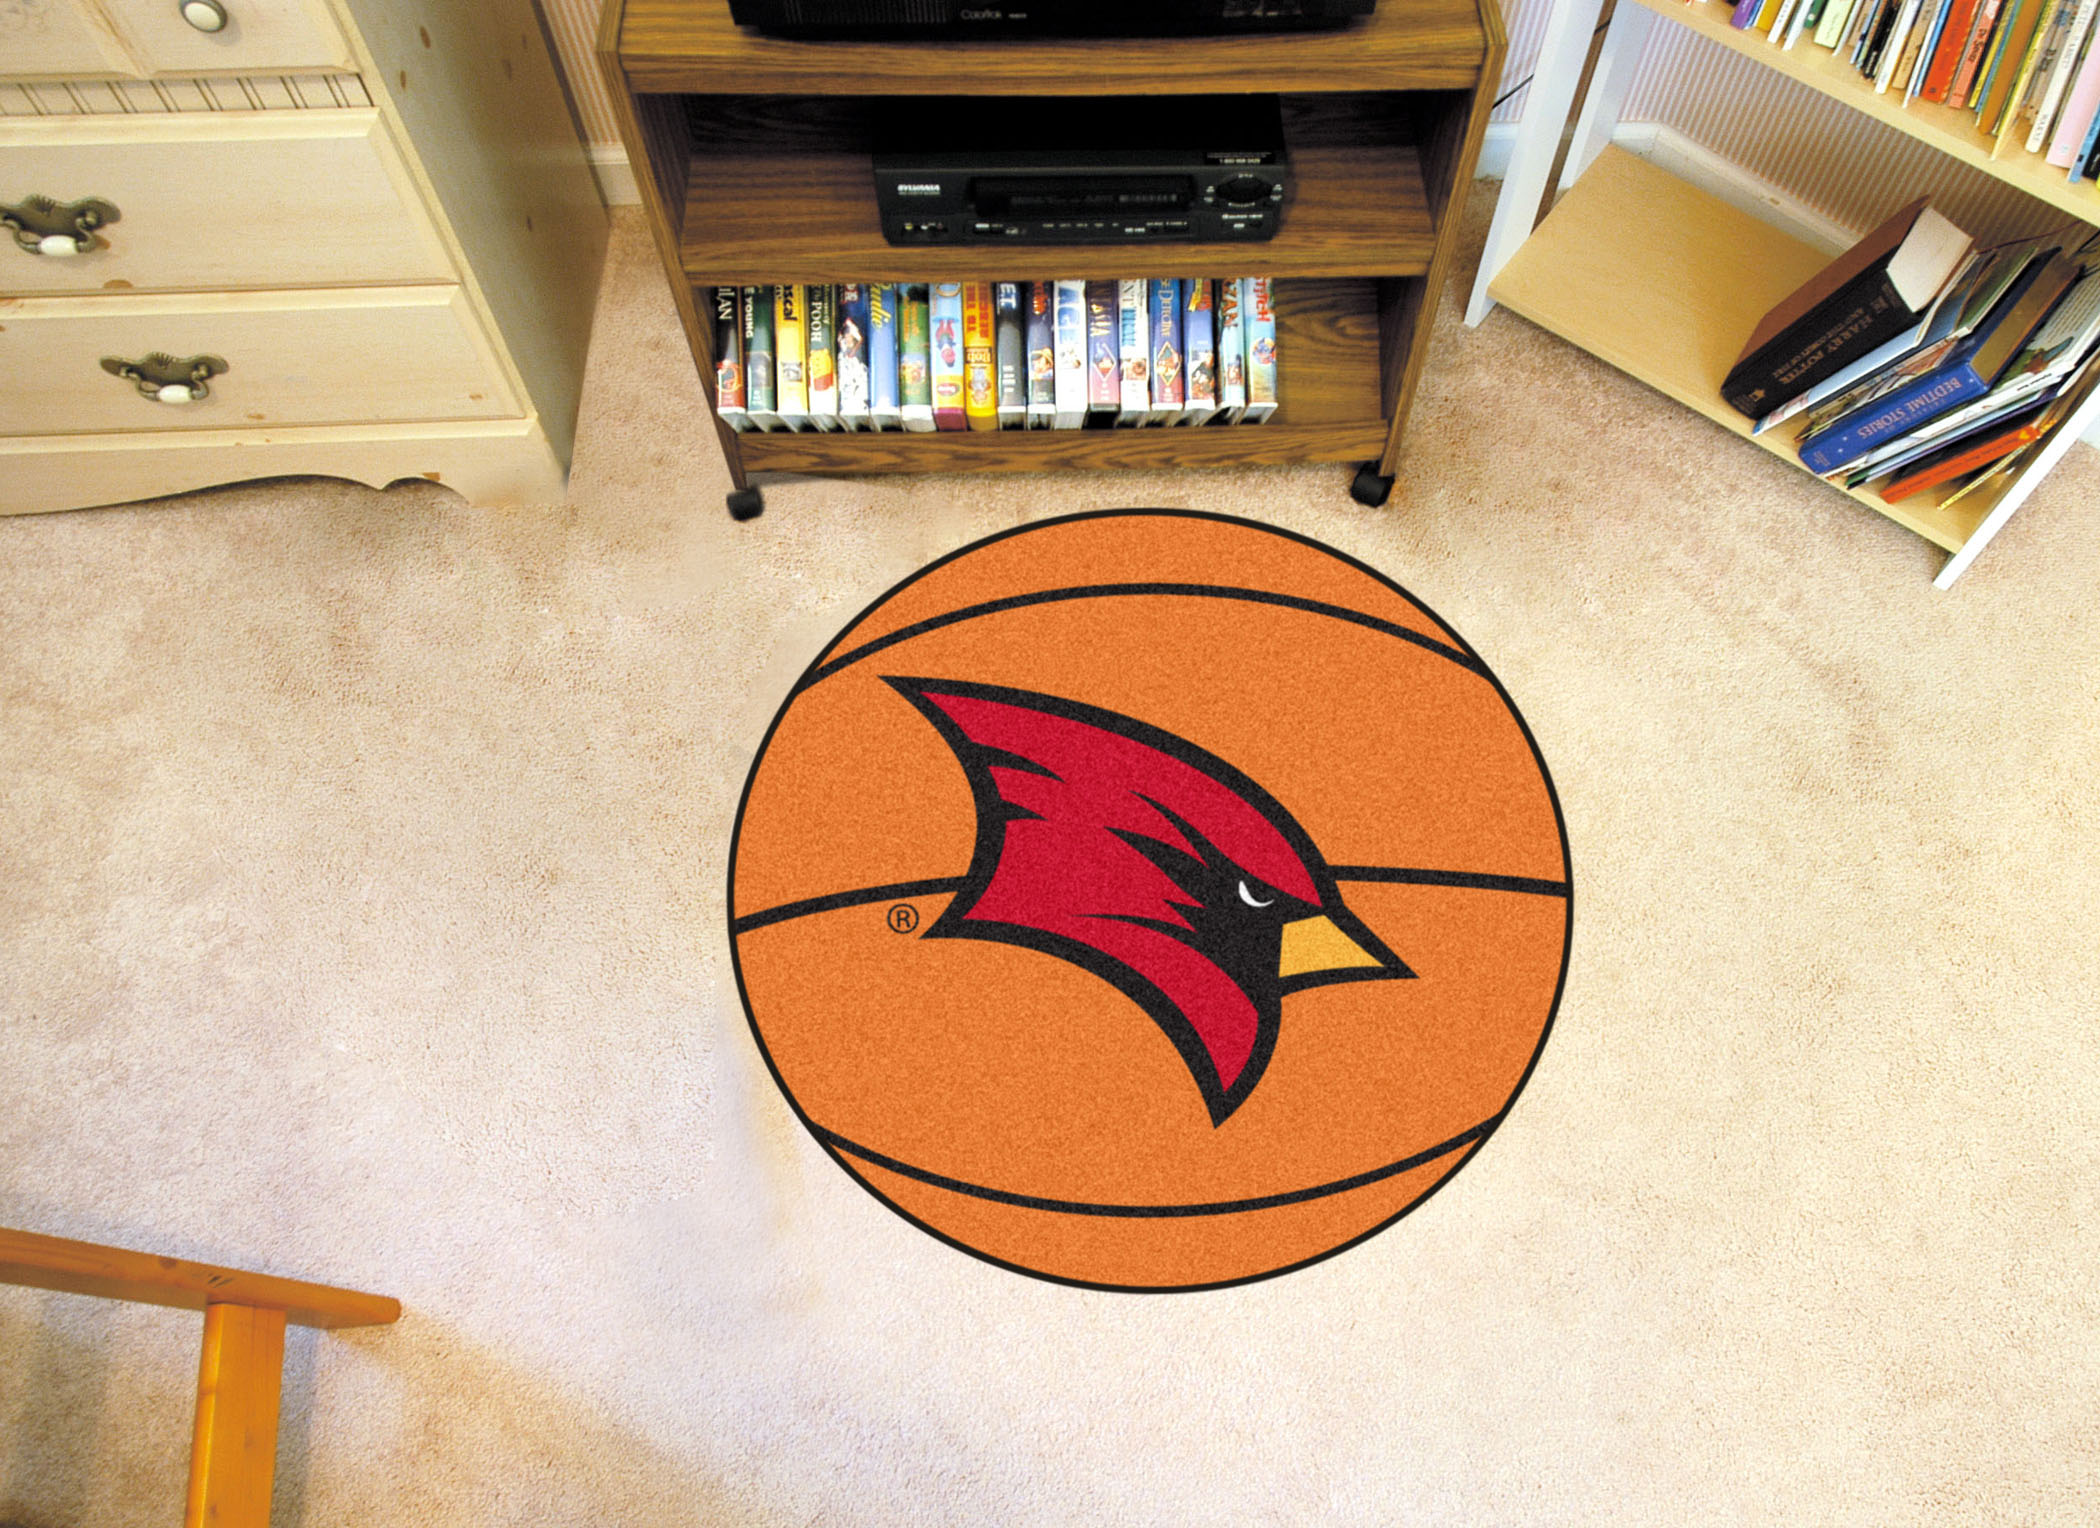 Saginaw Valley State Univ. Ball Shaped Area Rugs (Ball Shaped Area Rugs: Basketball)